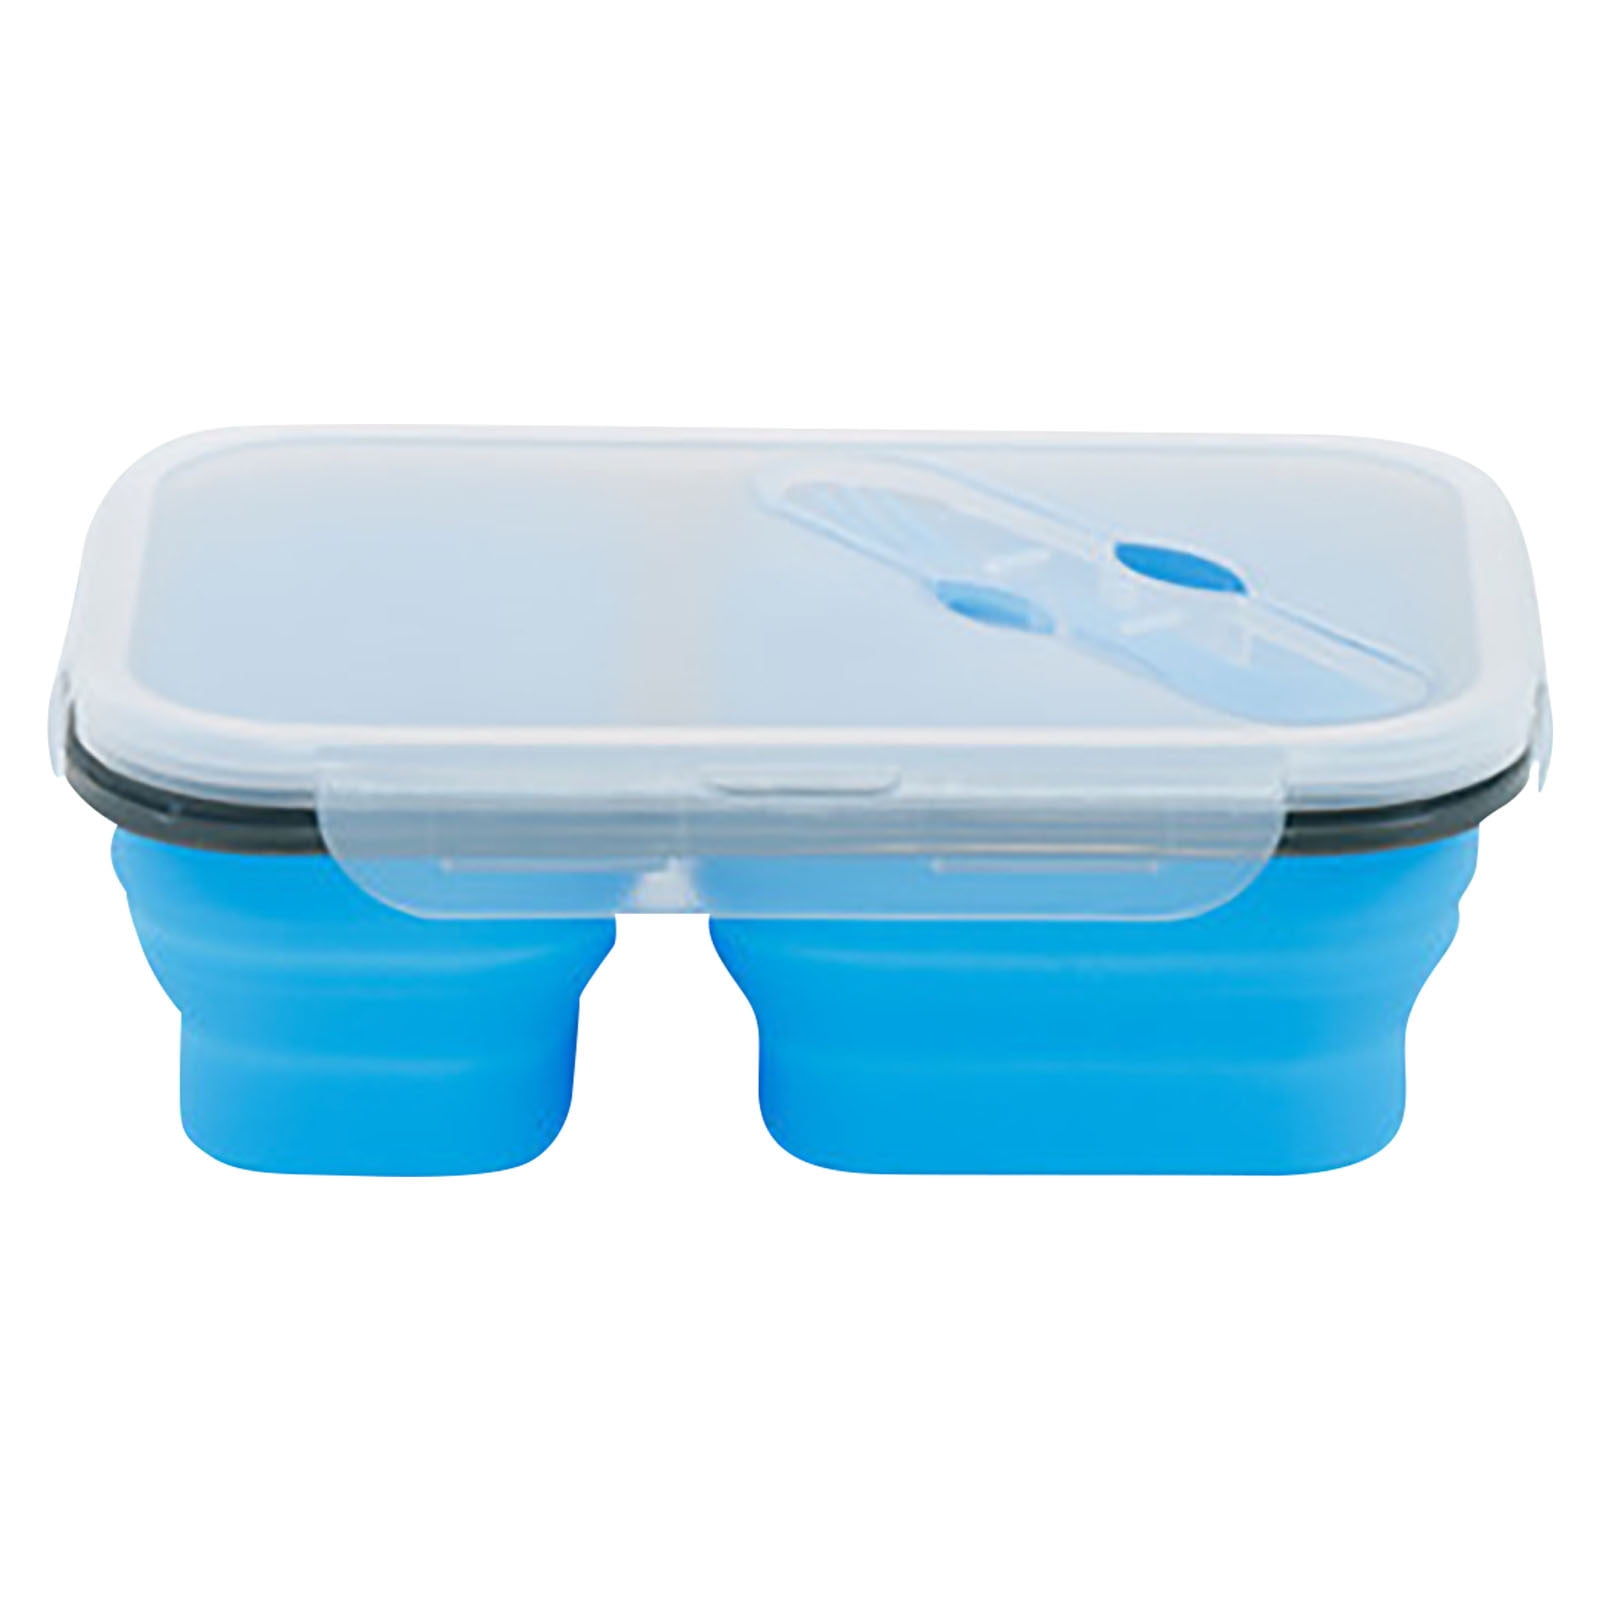 4 Cells Salad Container for Lunch Kids Reusable Food Prep